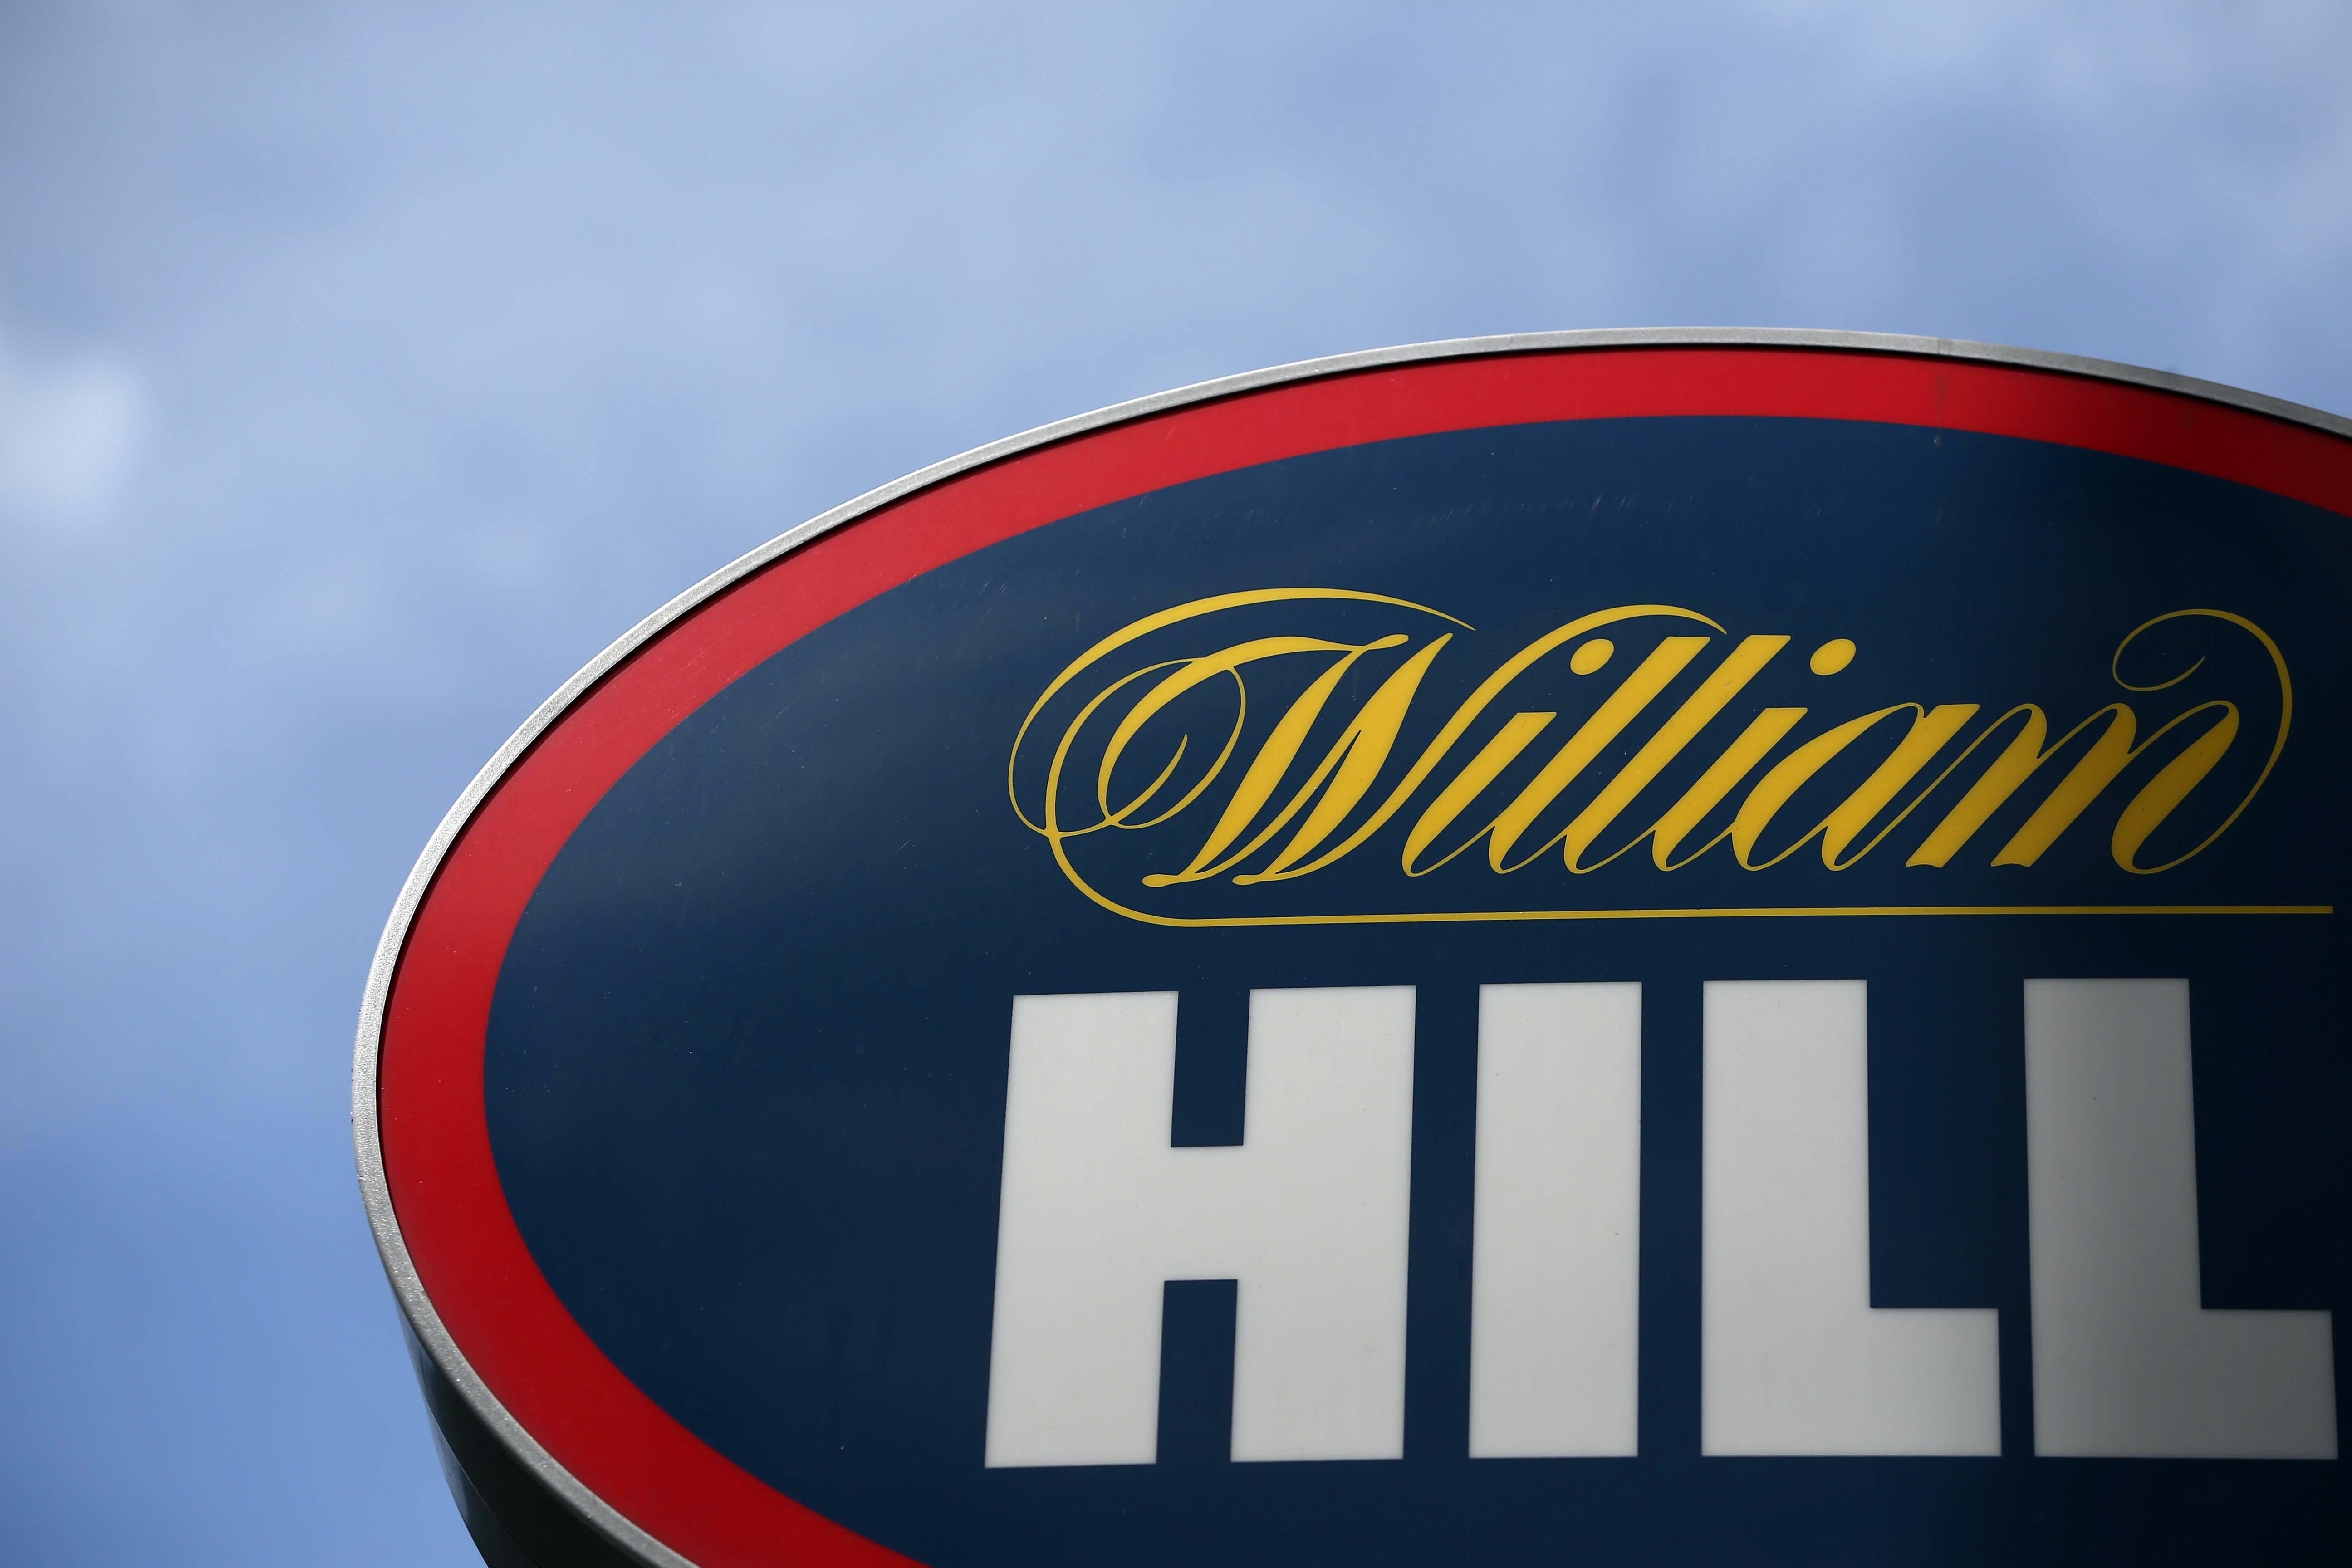 A branded sign is displayed outside a William Hill betting shop in London